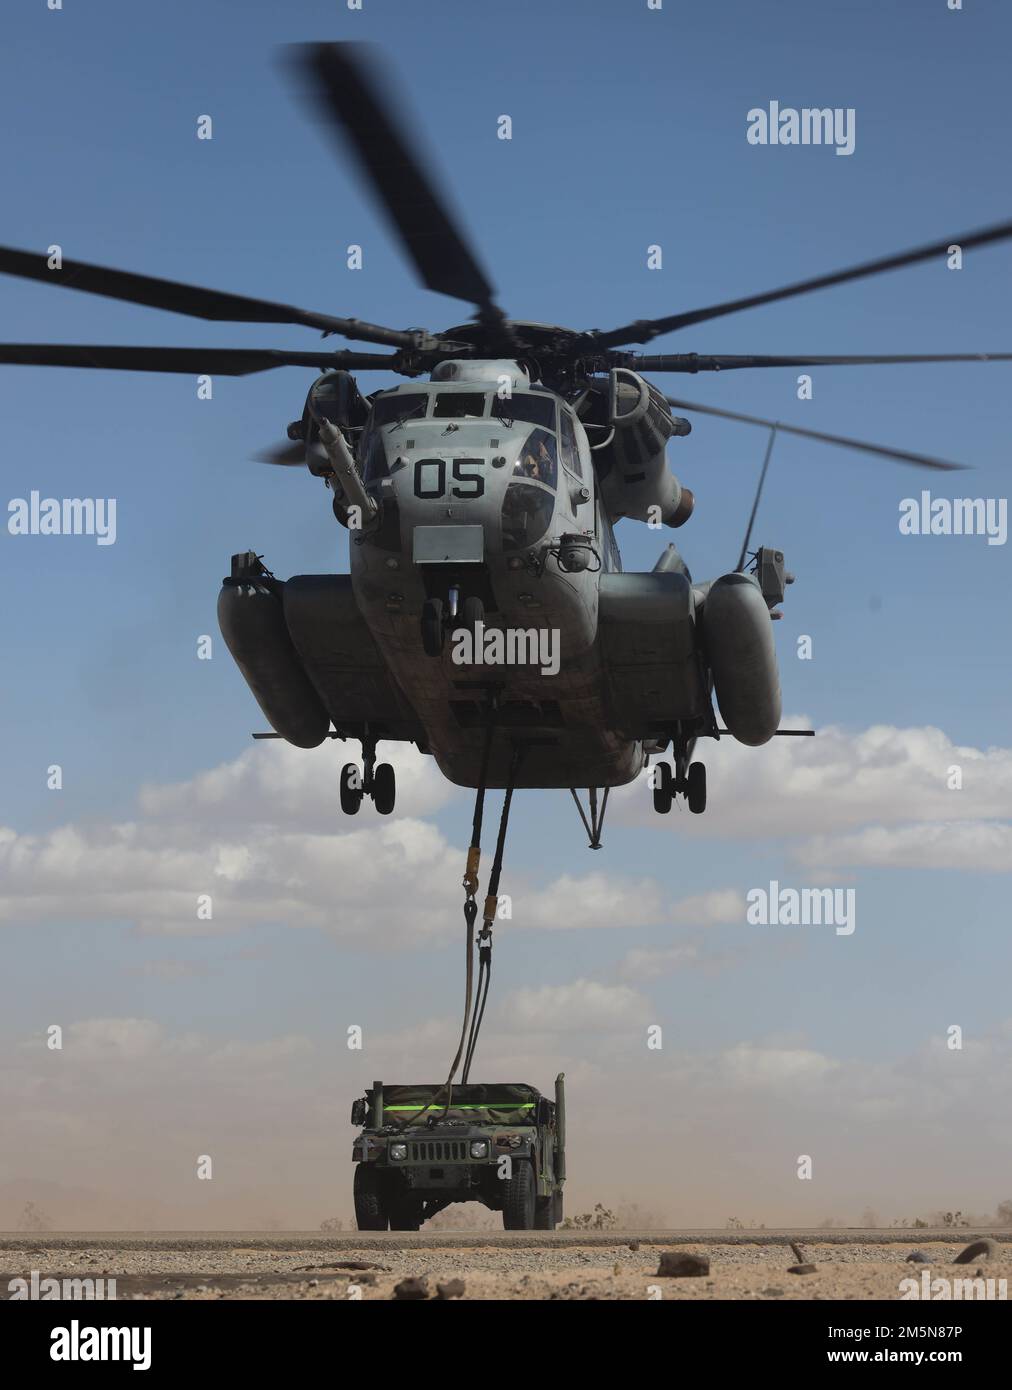 A U.S. Marine Corps CH-53E Super Stallion aircraft, assigned to Marine Aviation Weapons and Tactics Squadron One (MAWTS-1), conducts an external lift exercise during Weapons and Tactics Instructor (WTI) course 2-22, at Auxiliary Airfield II, near Yuma, Arizona, March 29, 2022. WTI is a seven-week training event hosted by MAWTS-1, providing standardized advanced tactical training and certification of unit instructor qualifications to support Marine aviation training and readiness, and assists in developing and employing aviation weapons and tactics. Stock Photo